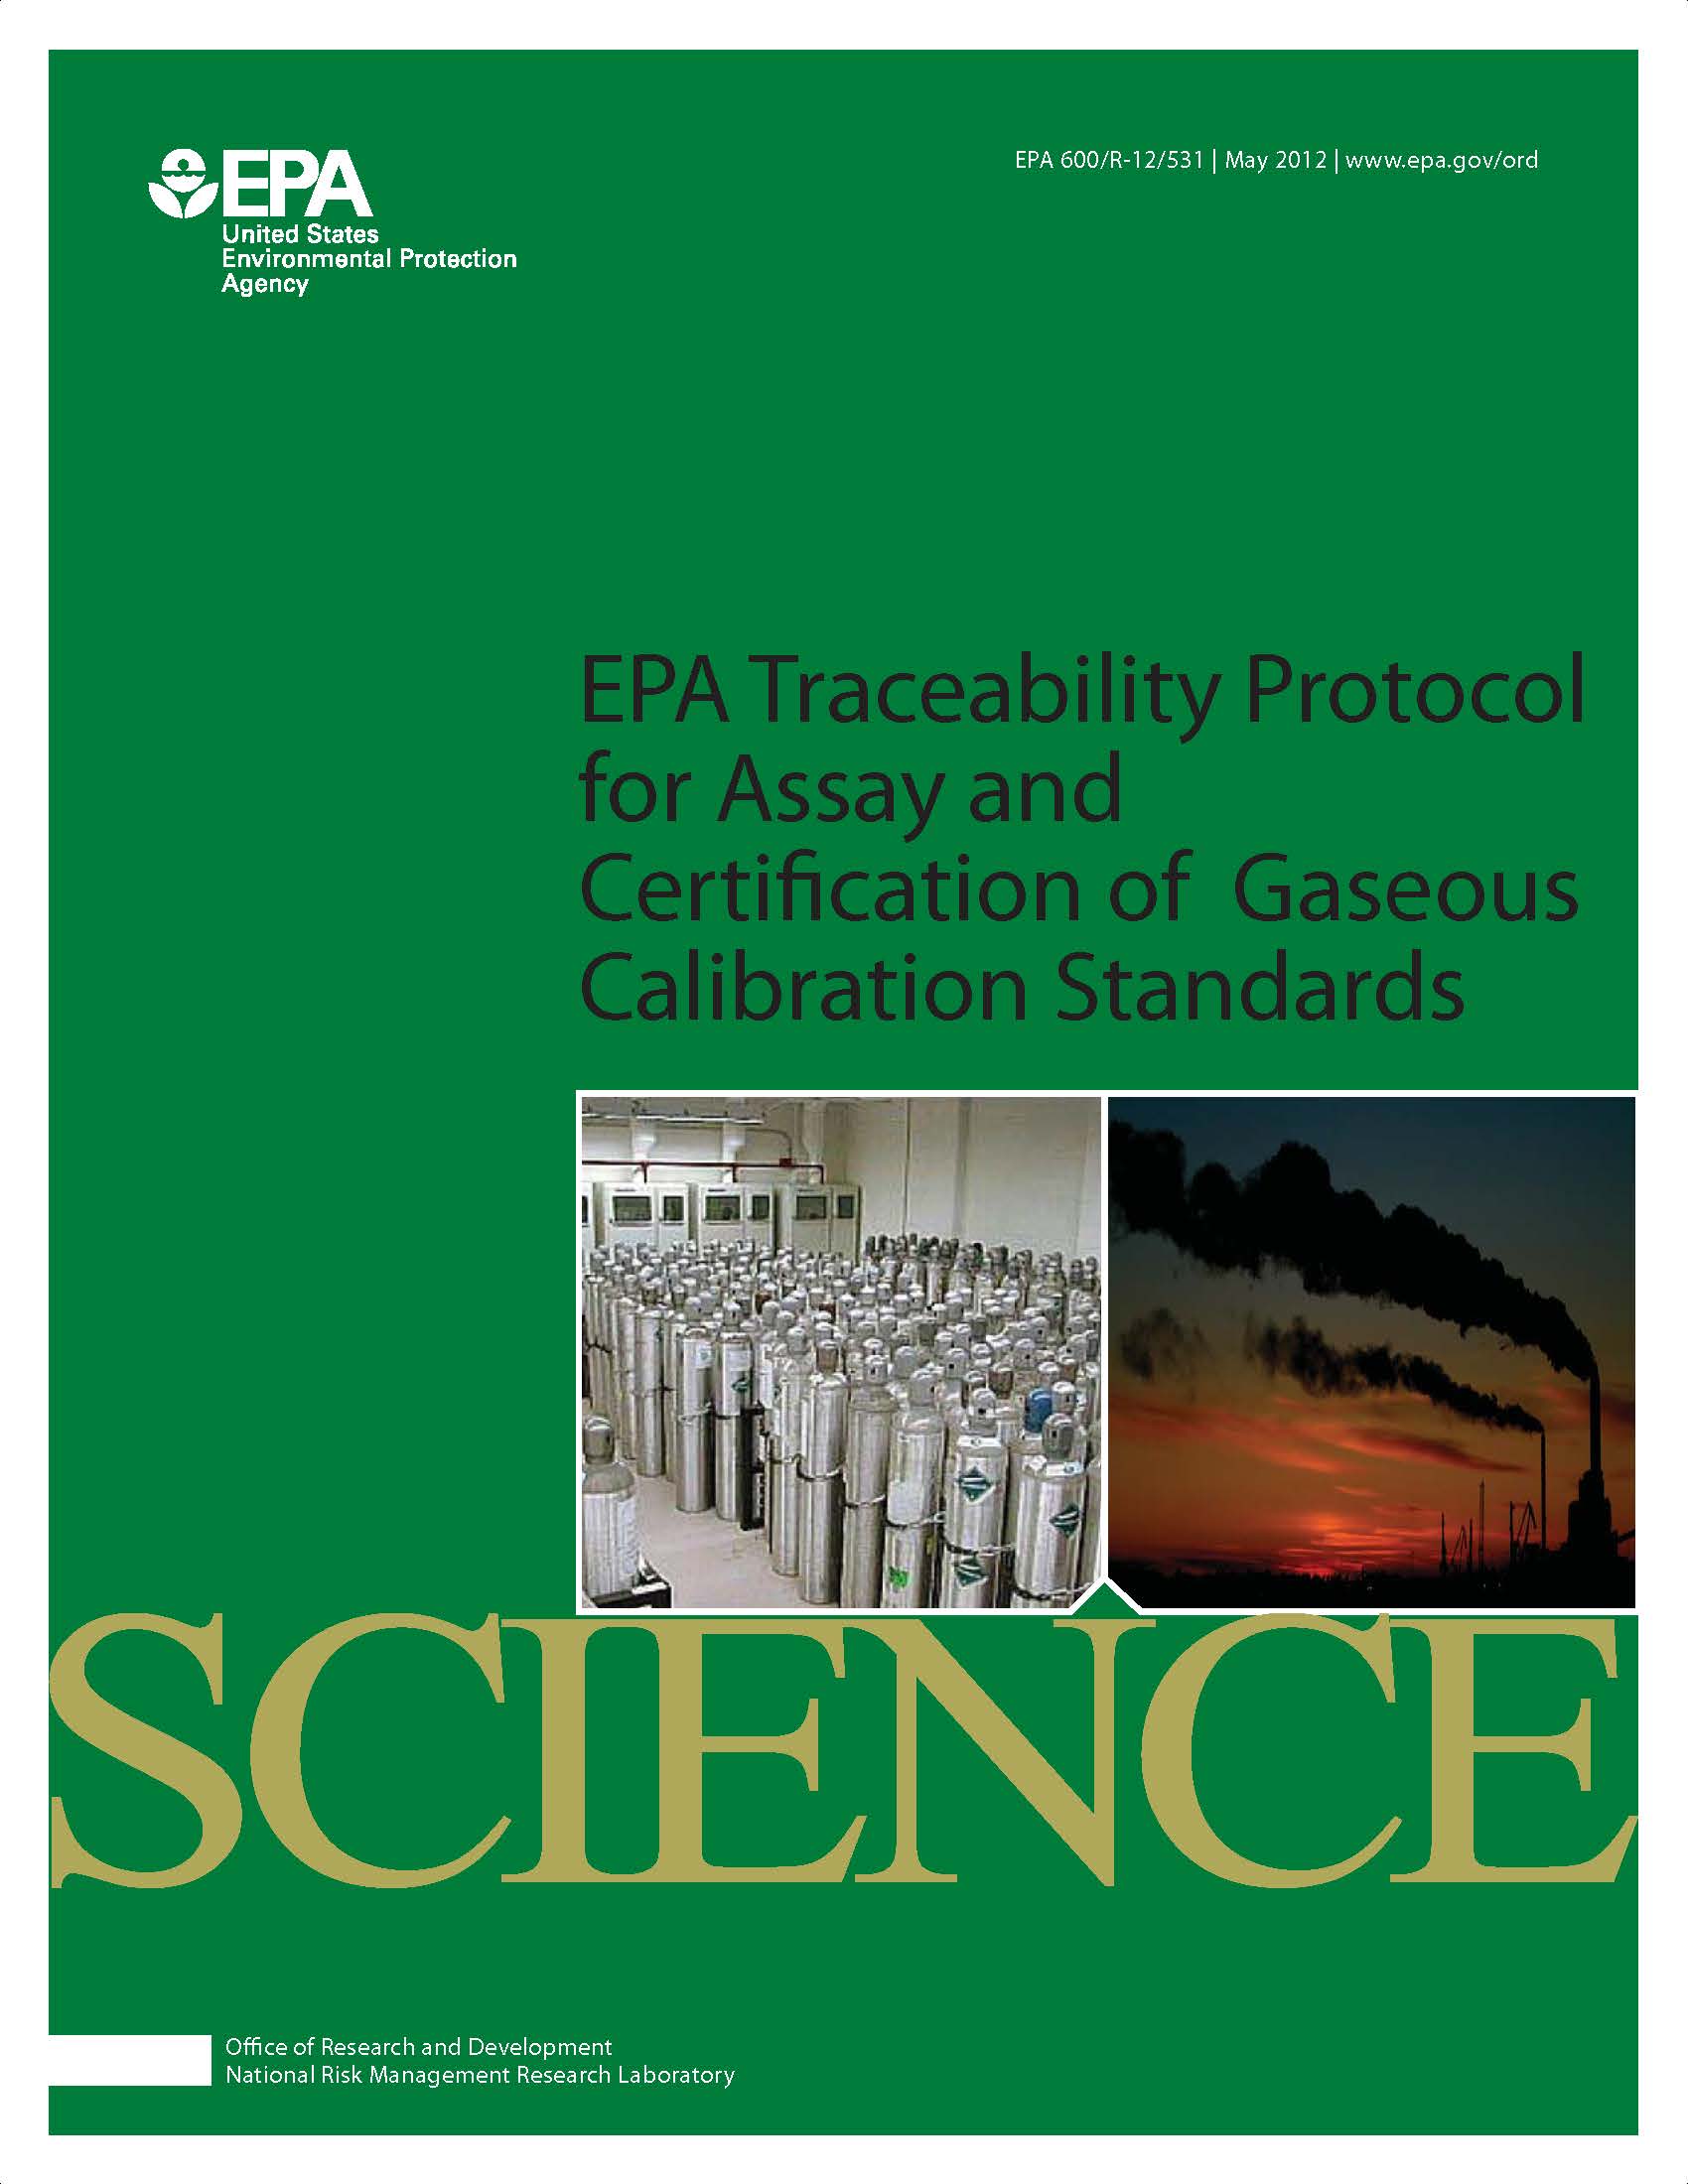 EPA Traceability Protocol for Assay and Certification of Gaseous Calibration Standards